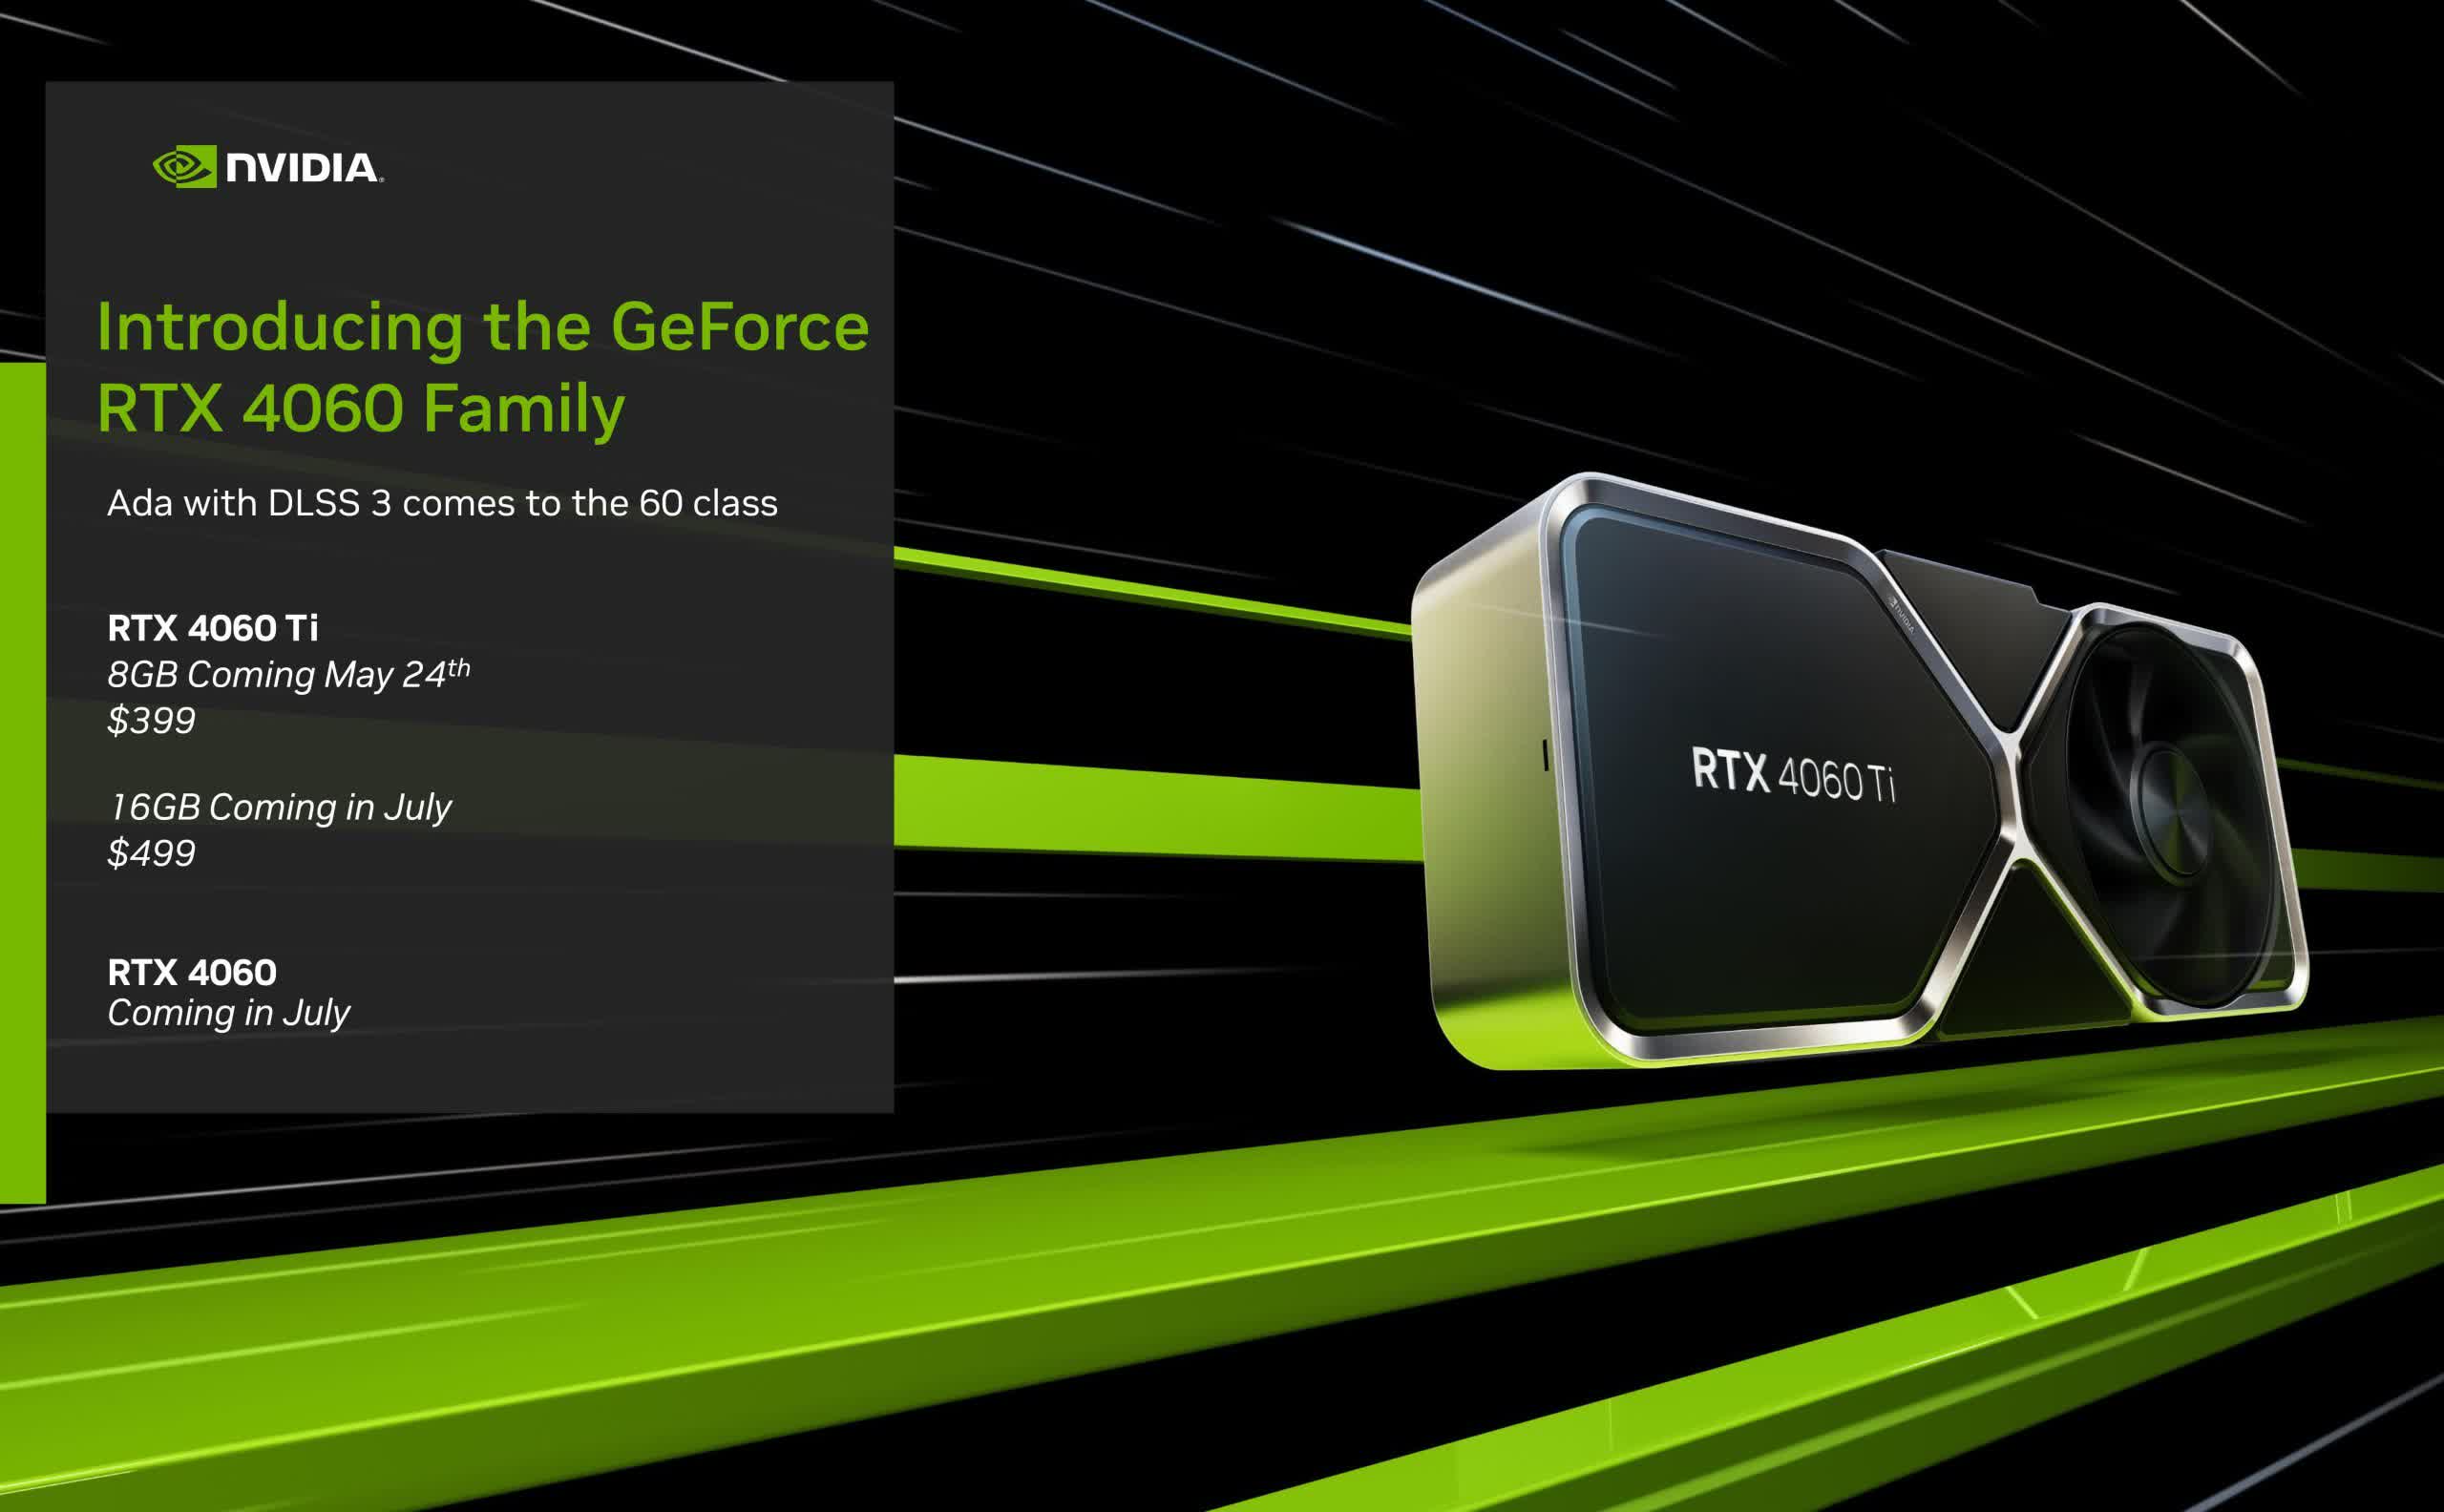 GeForce RTX 4060 Ti 16GB is likely arriving on July 18, but board partners are uninterested